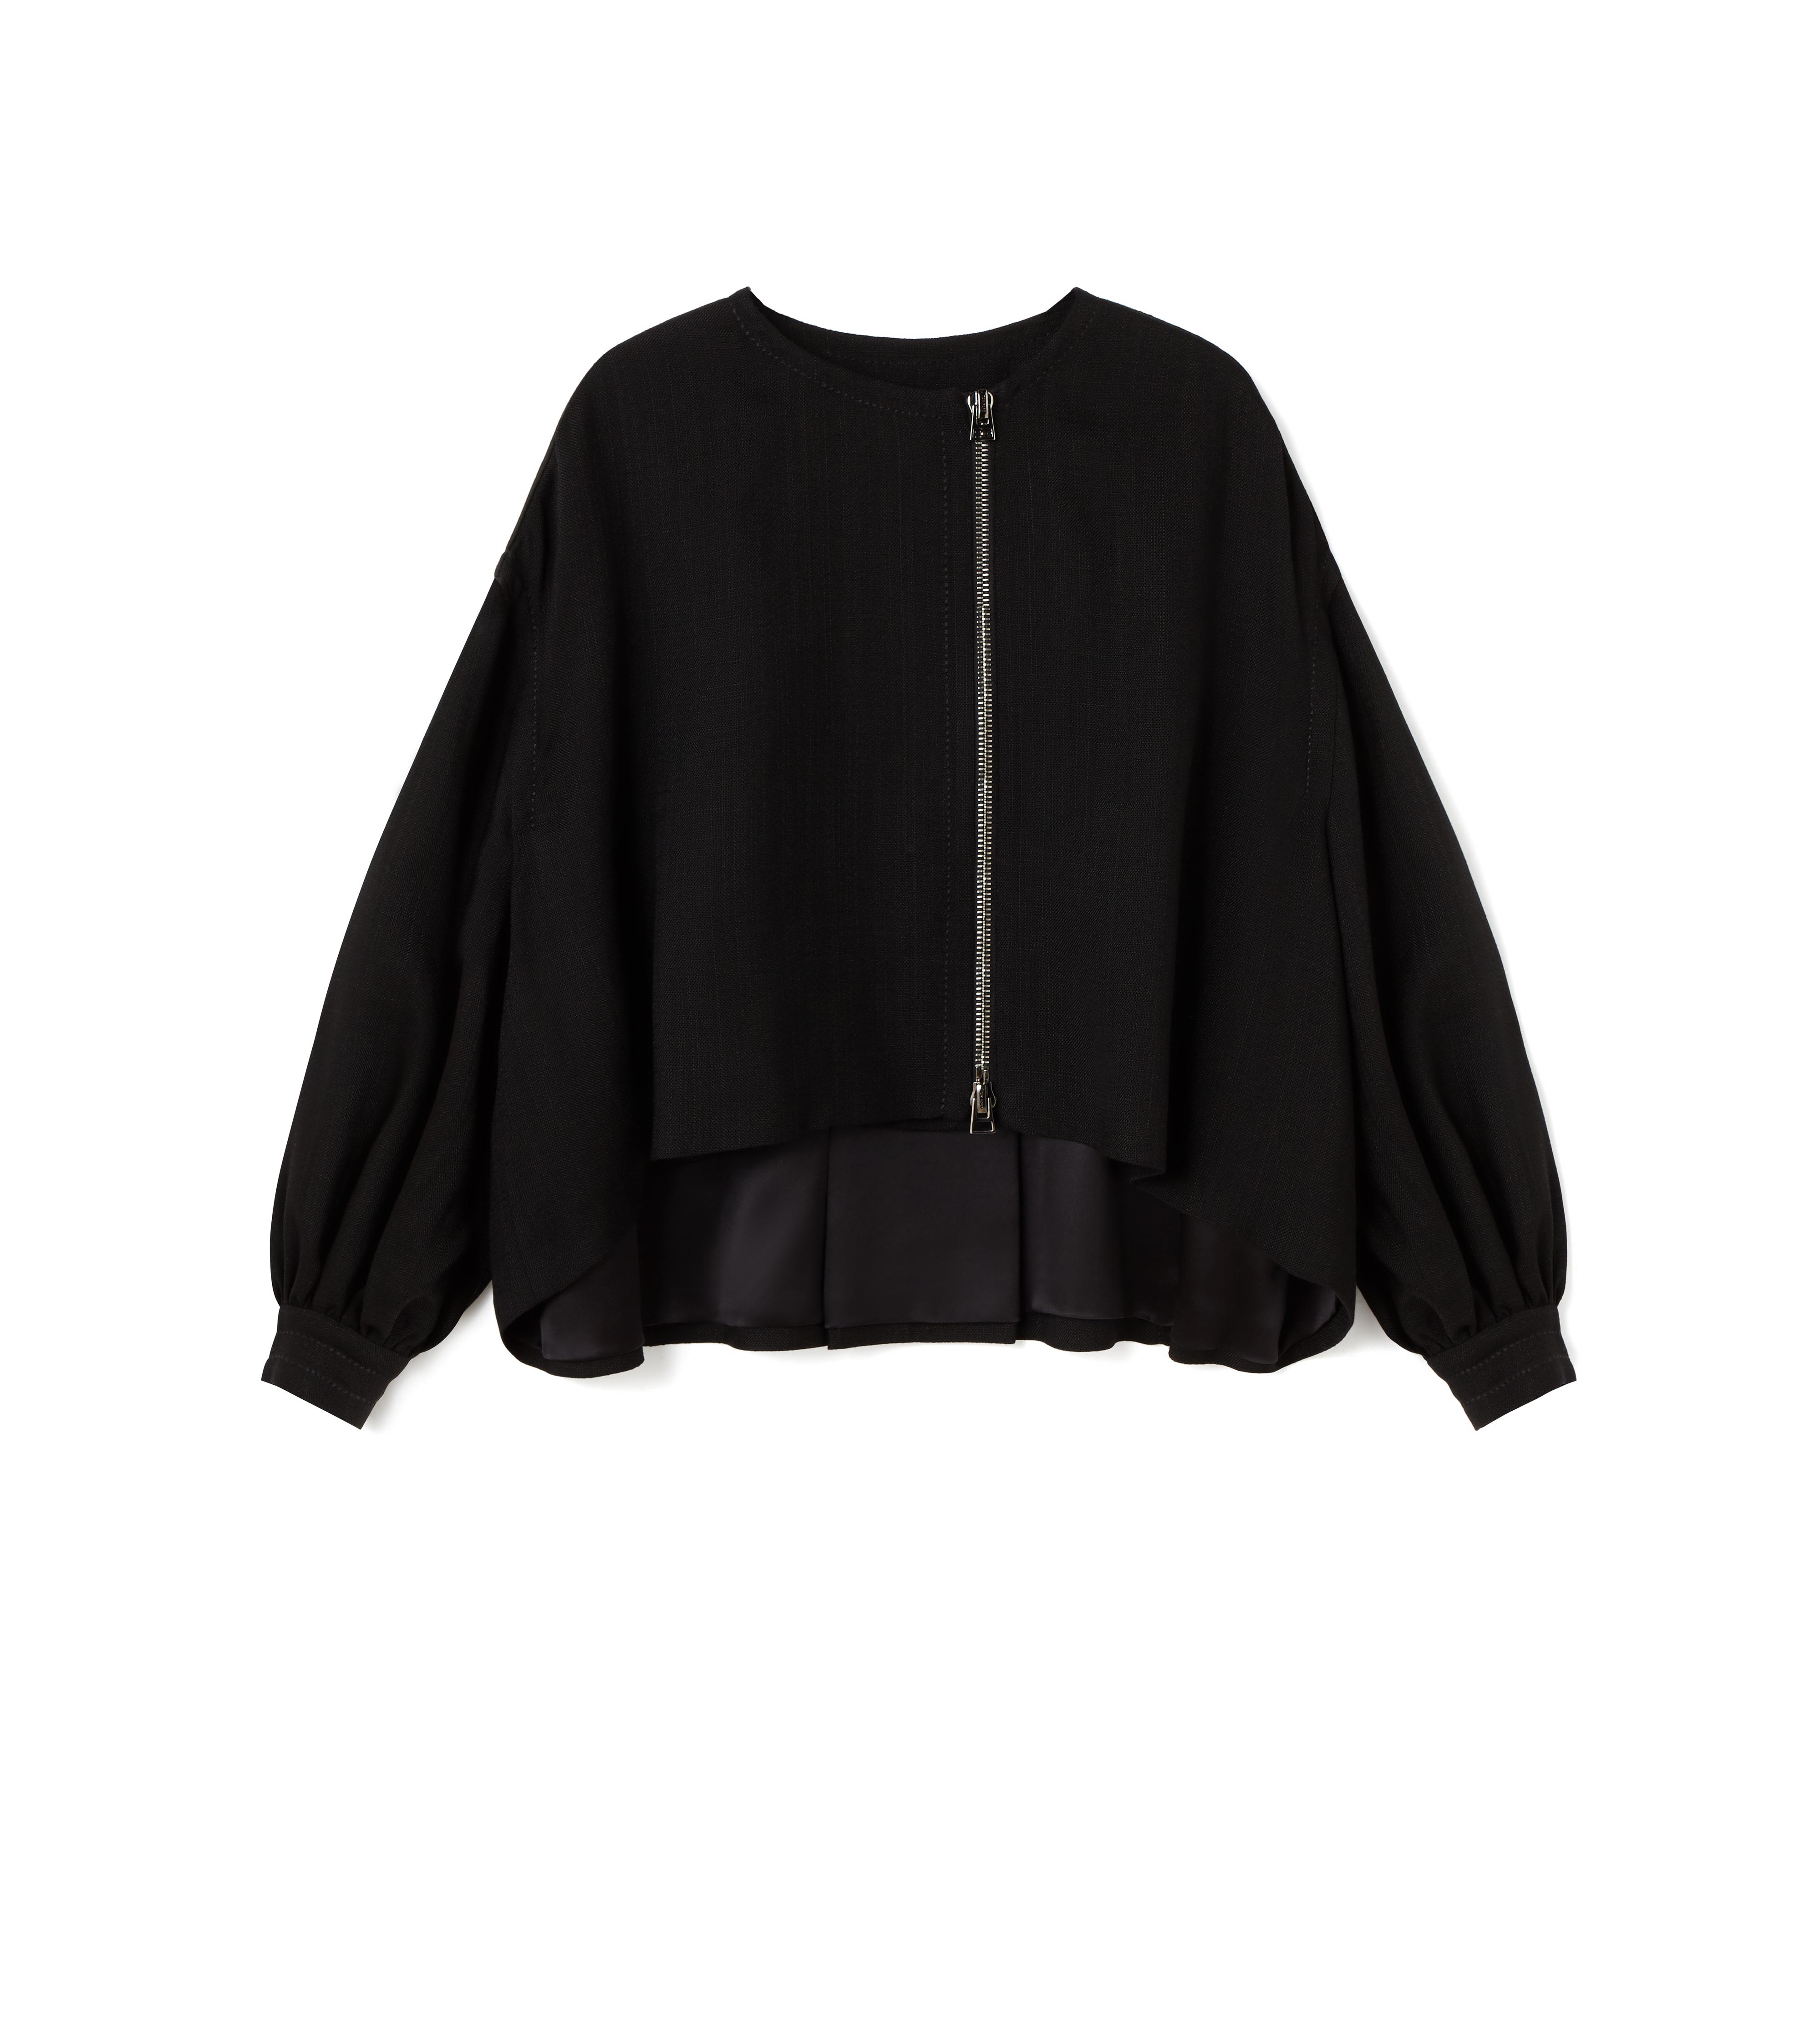 Outerwear - Women's Outerwear by TOM FORD - Designer Coats & Jackets ...